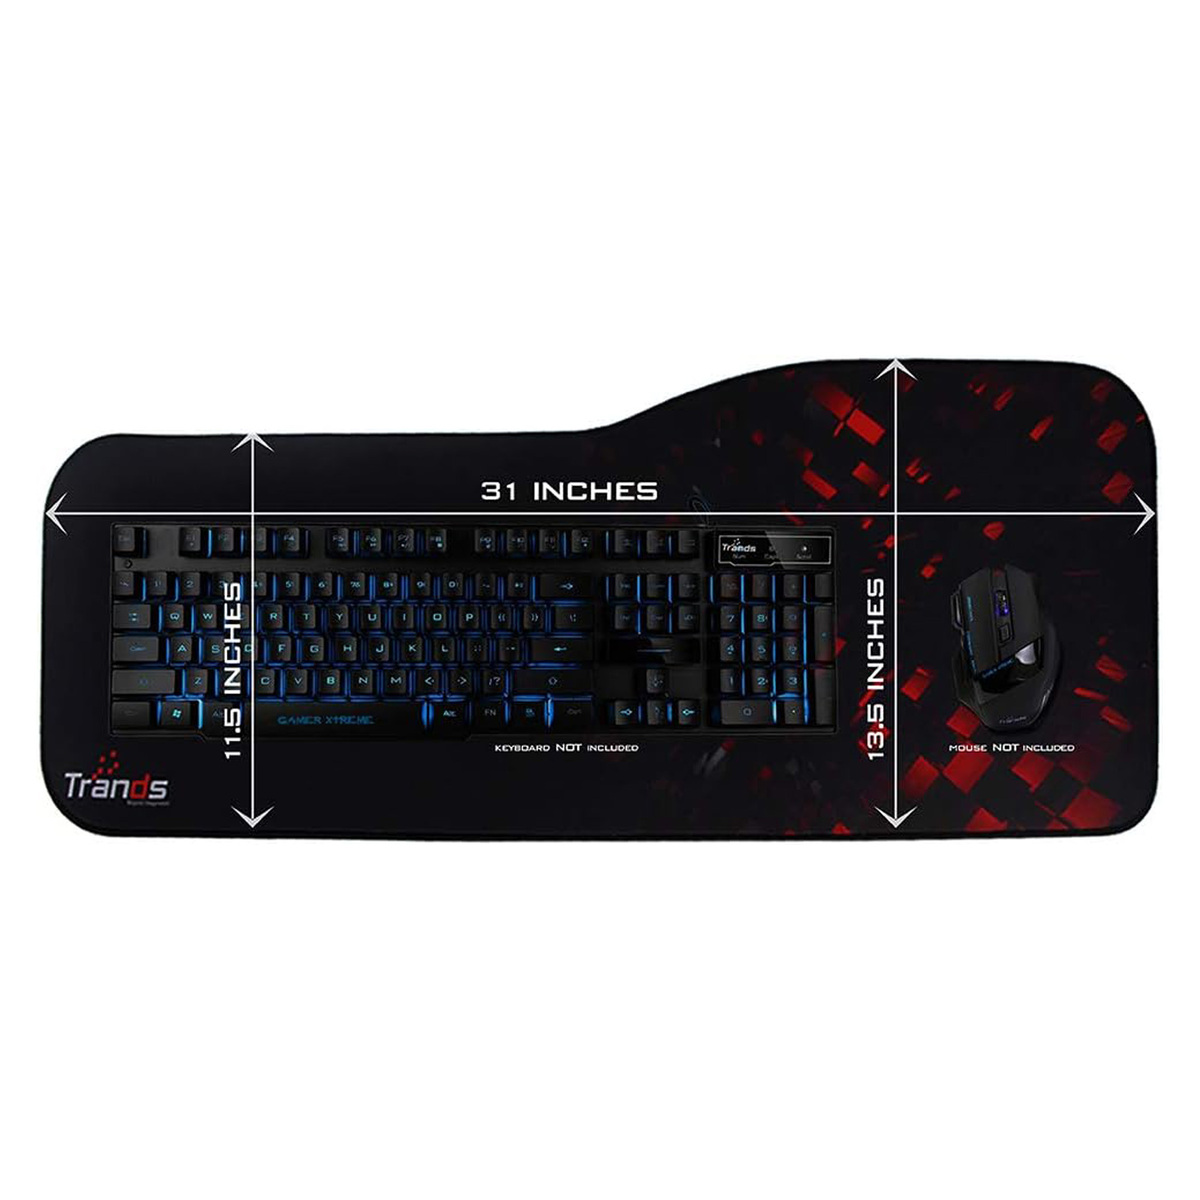 Trands Gaming Mouse Pad Mat, TR-MPG948